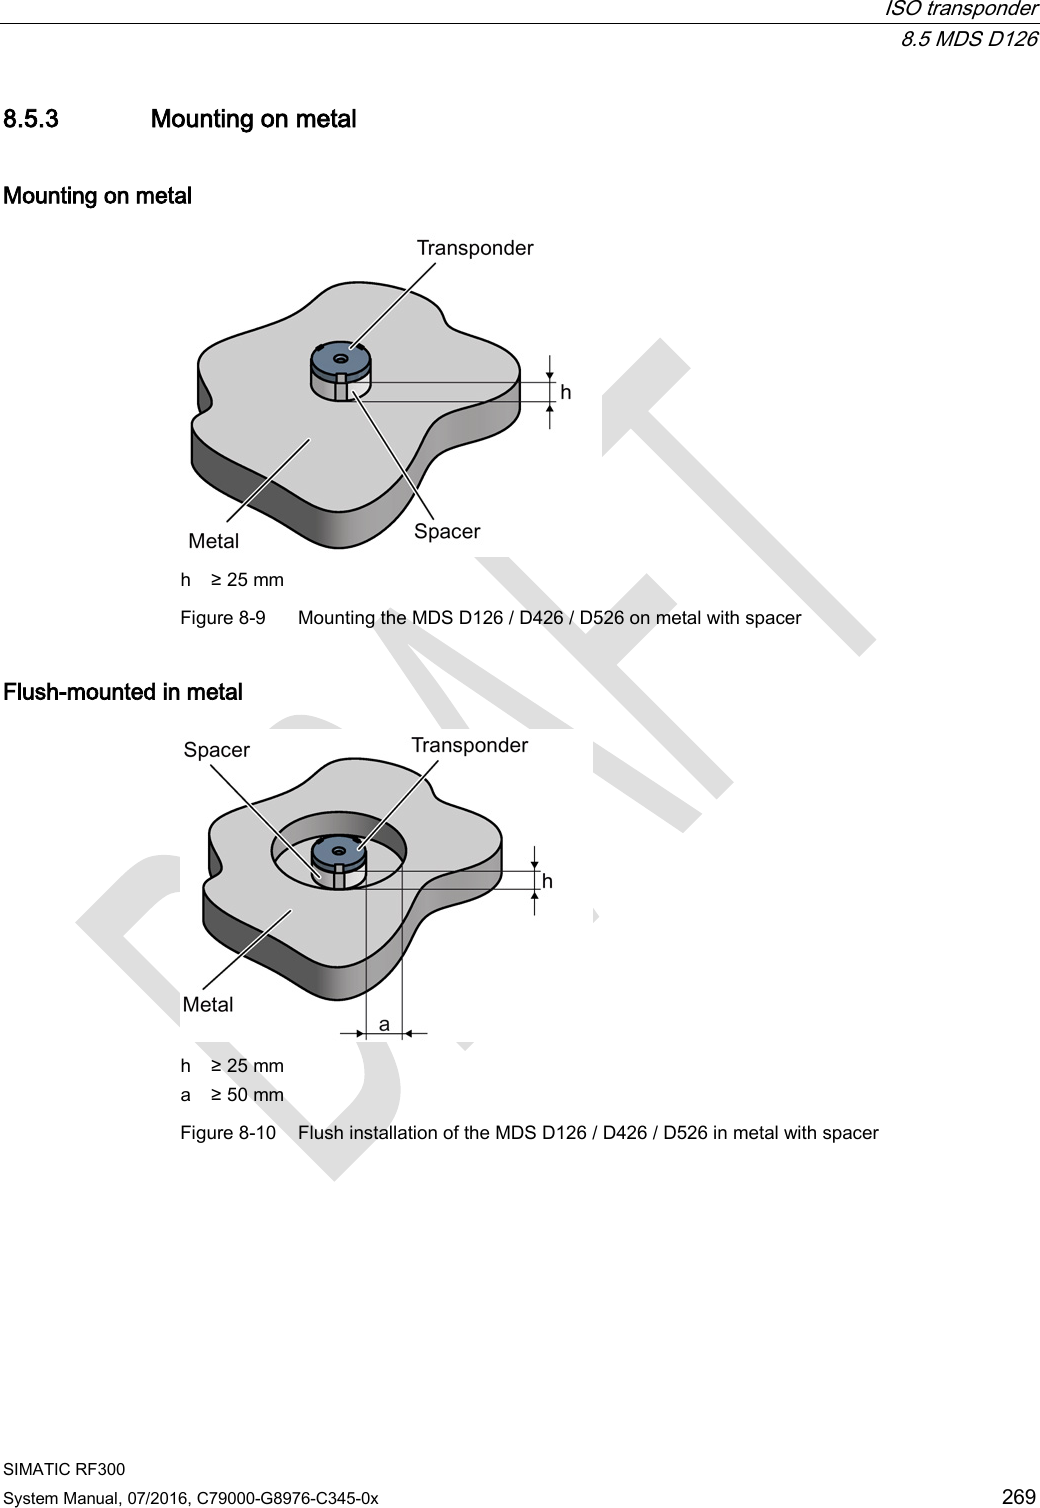  ISO transponder  8.5 MDS D126 SIMATIC RF300 System Manual, 07/2016, C79000-G8976-C345-0x 269 8.5.3 Mounting on metal Mounting on metal  h ≥ 25 mm Figure 8-9  Mounting the MDS D126 / D426 / D526 on metal with spacer Flush-mounted in metal  h ≥ 25 mm a ≥ 50 mm Figure 8-10 Flush installation of the MDS D126 / D426 / D526 in metal with spacer 